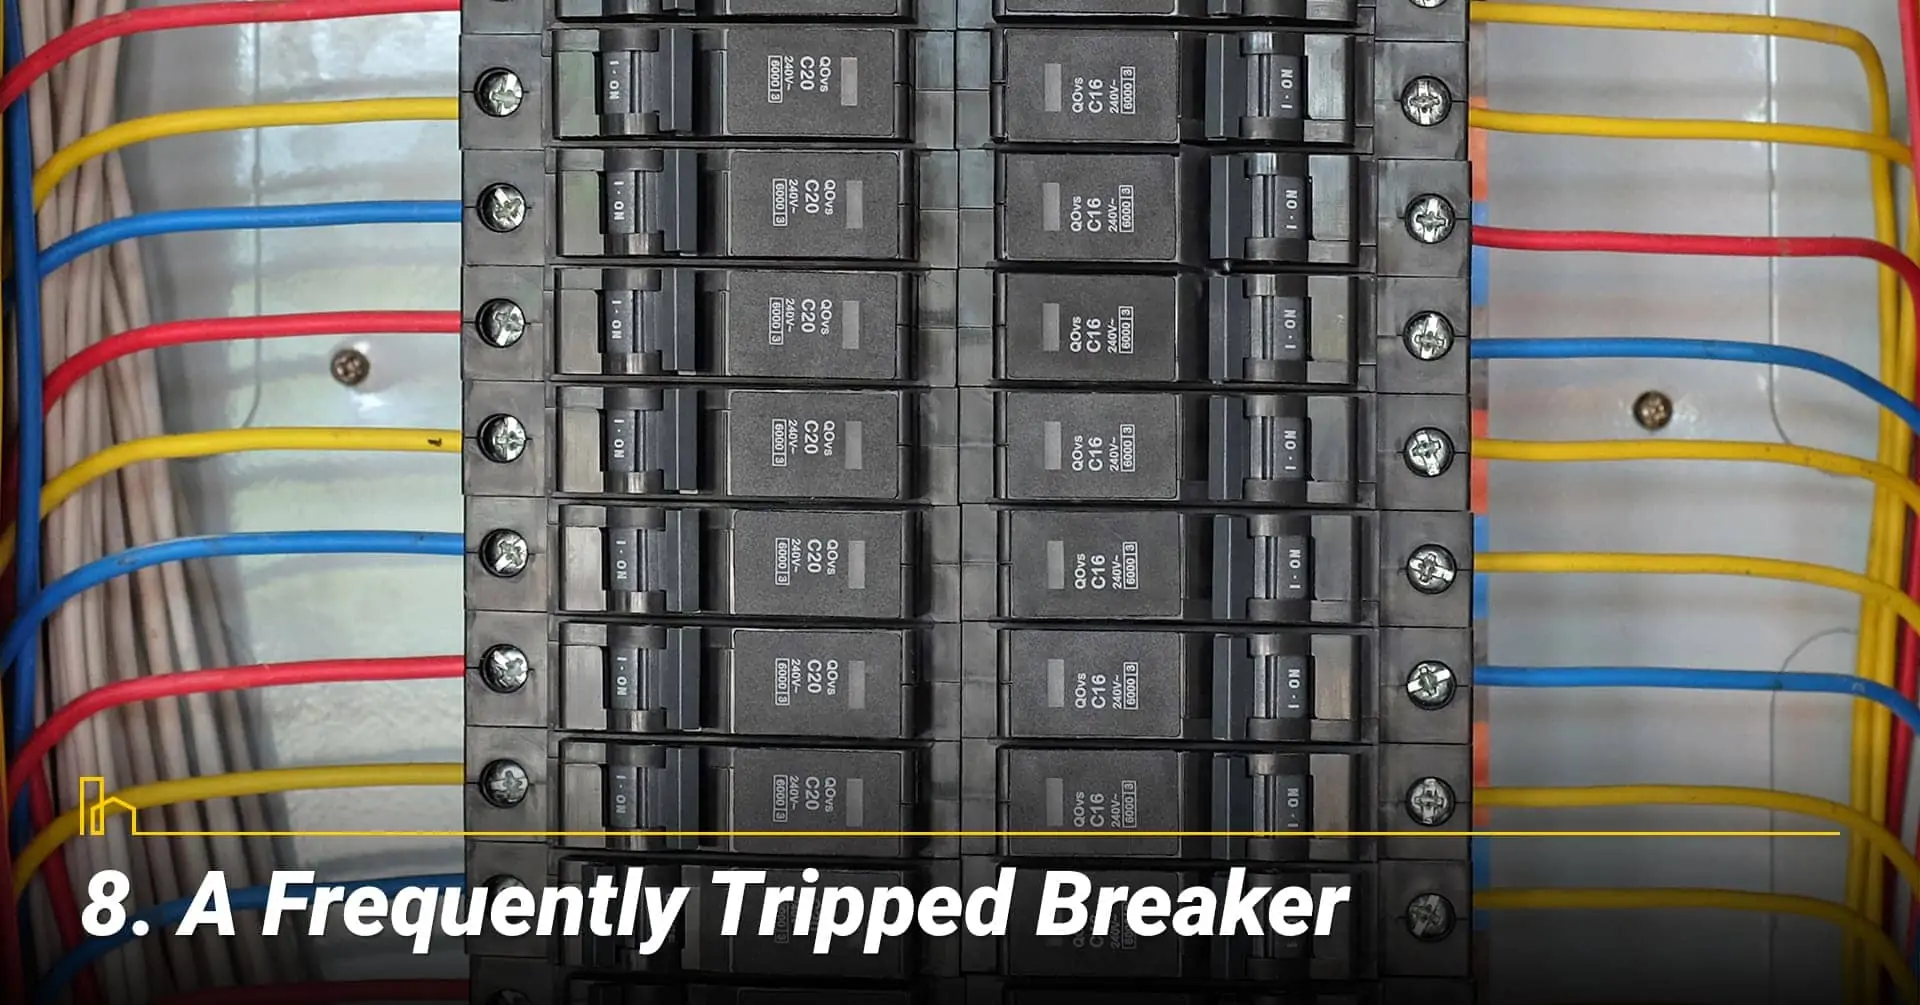 A Frequently Tripped Breaker, bad breakers